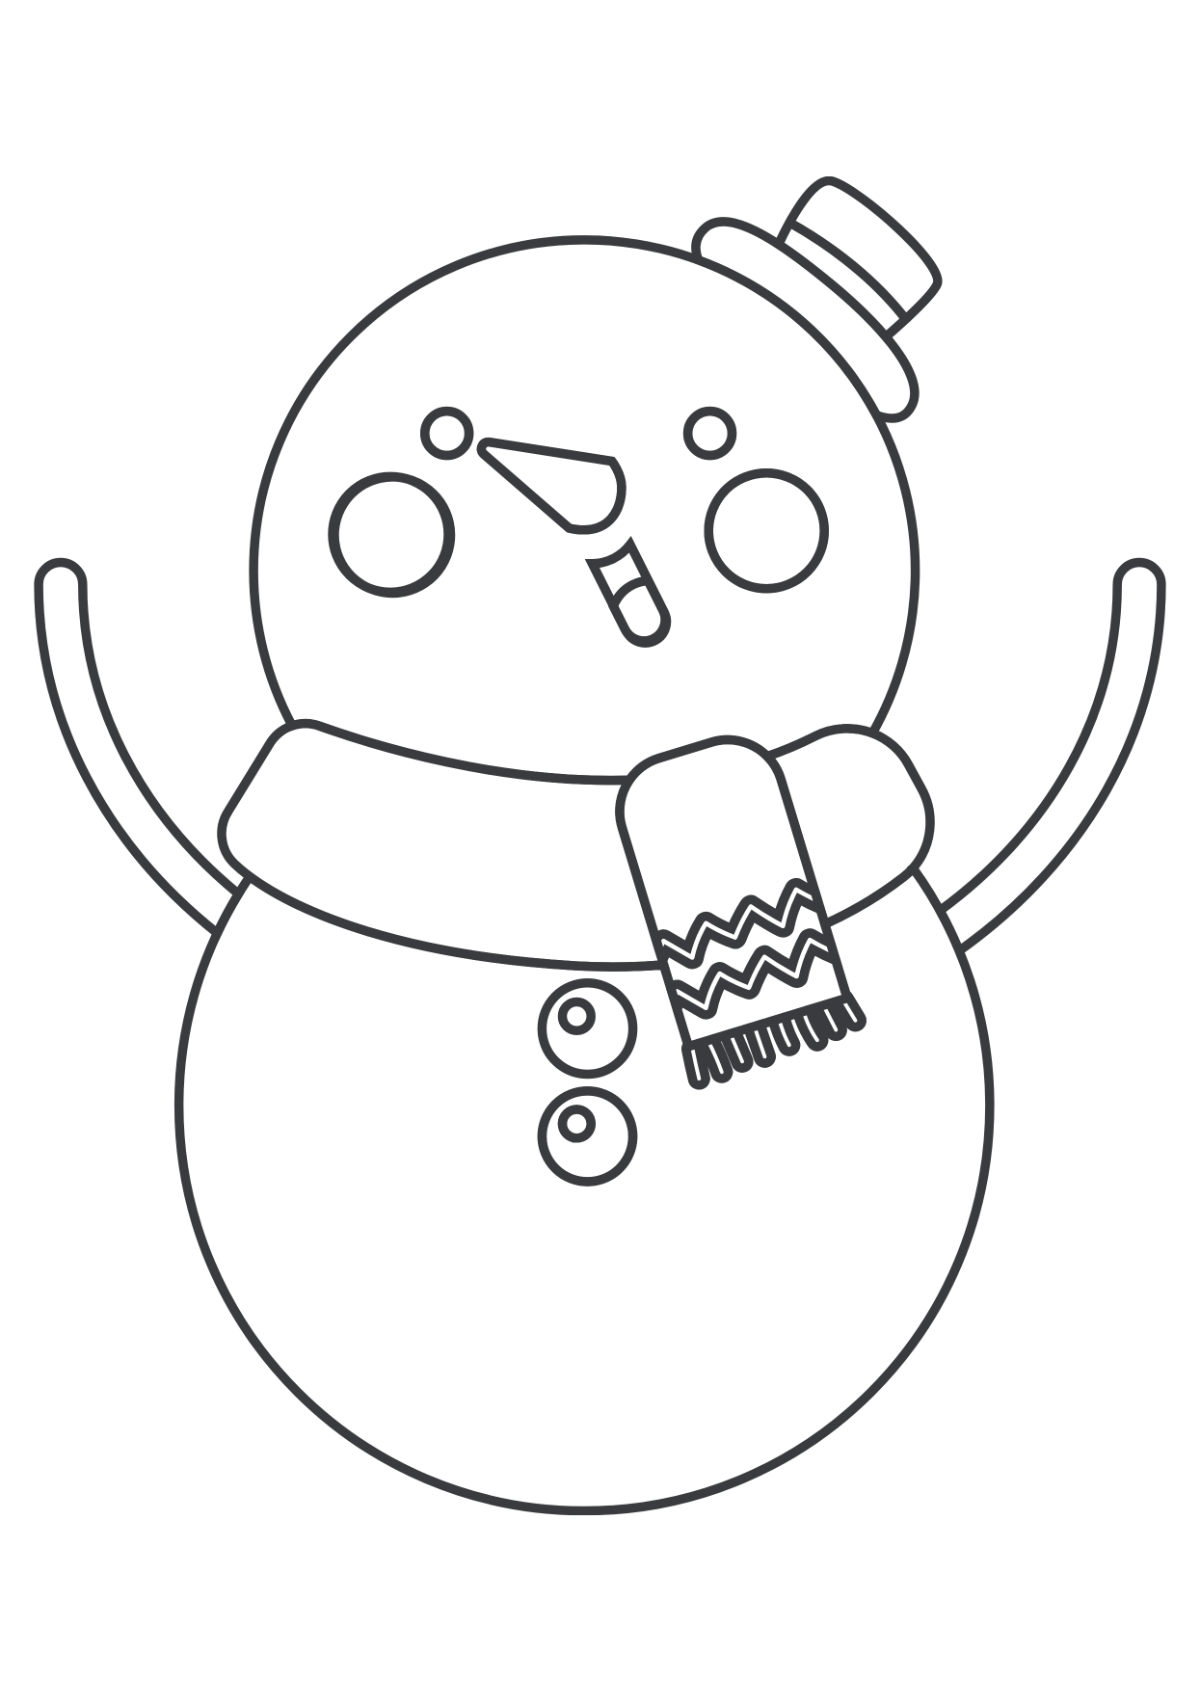 Snowman and Christmas pine tree coloring page for kids drawing education.  Simple cartoon illustration in fantasy theme for coloring book 14016673  Vector Art at Vecteezy